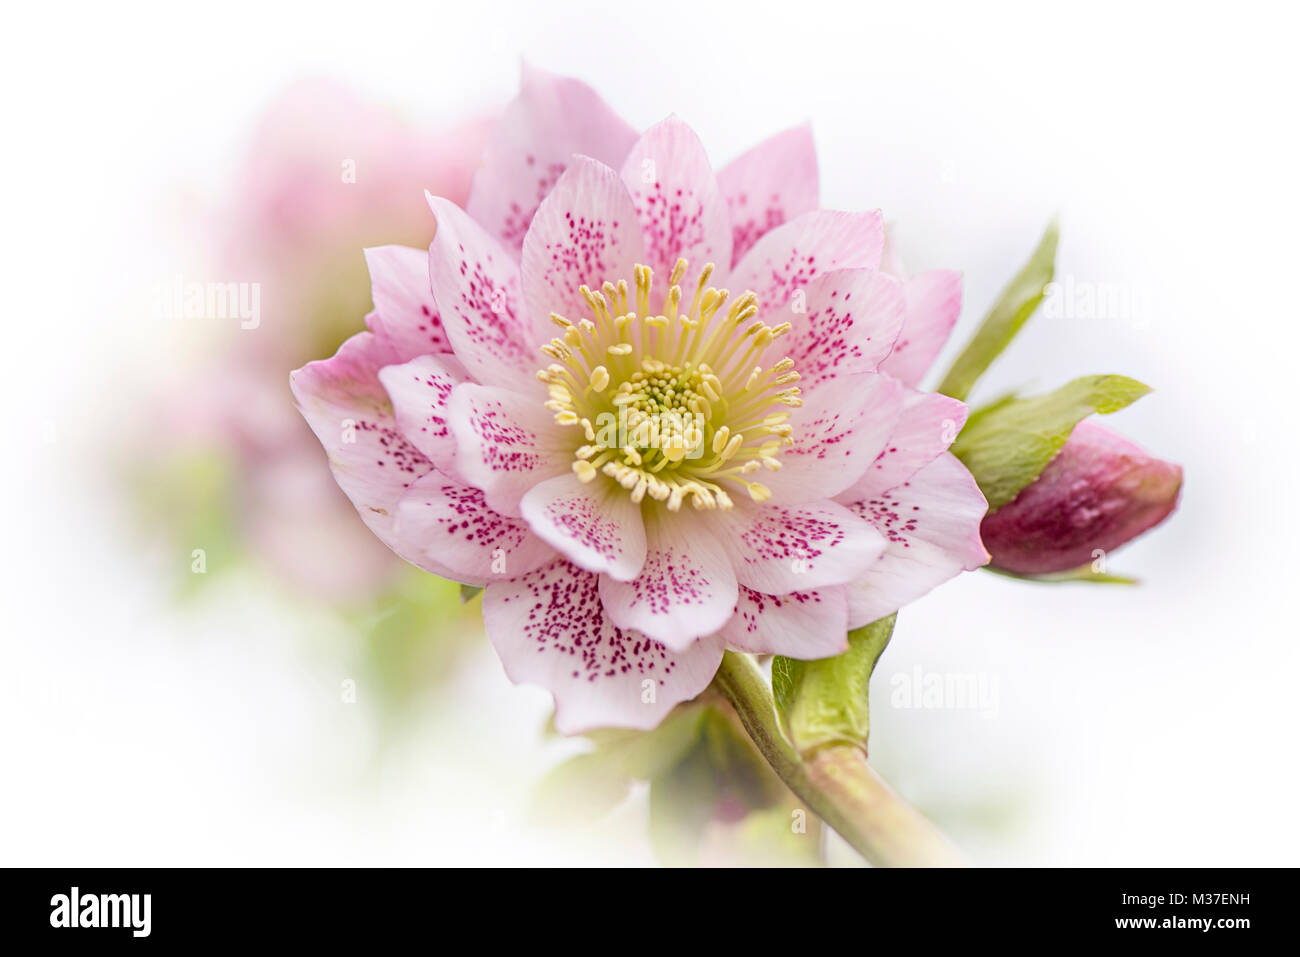 Close-up image of a single, pink Double flowered Pink Hellebore flower, also known as a Lenten Rose or Christmas Rose. Stock Photo